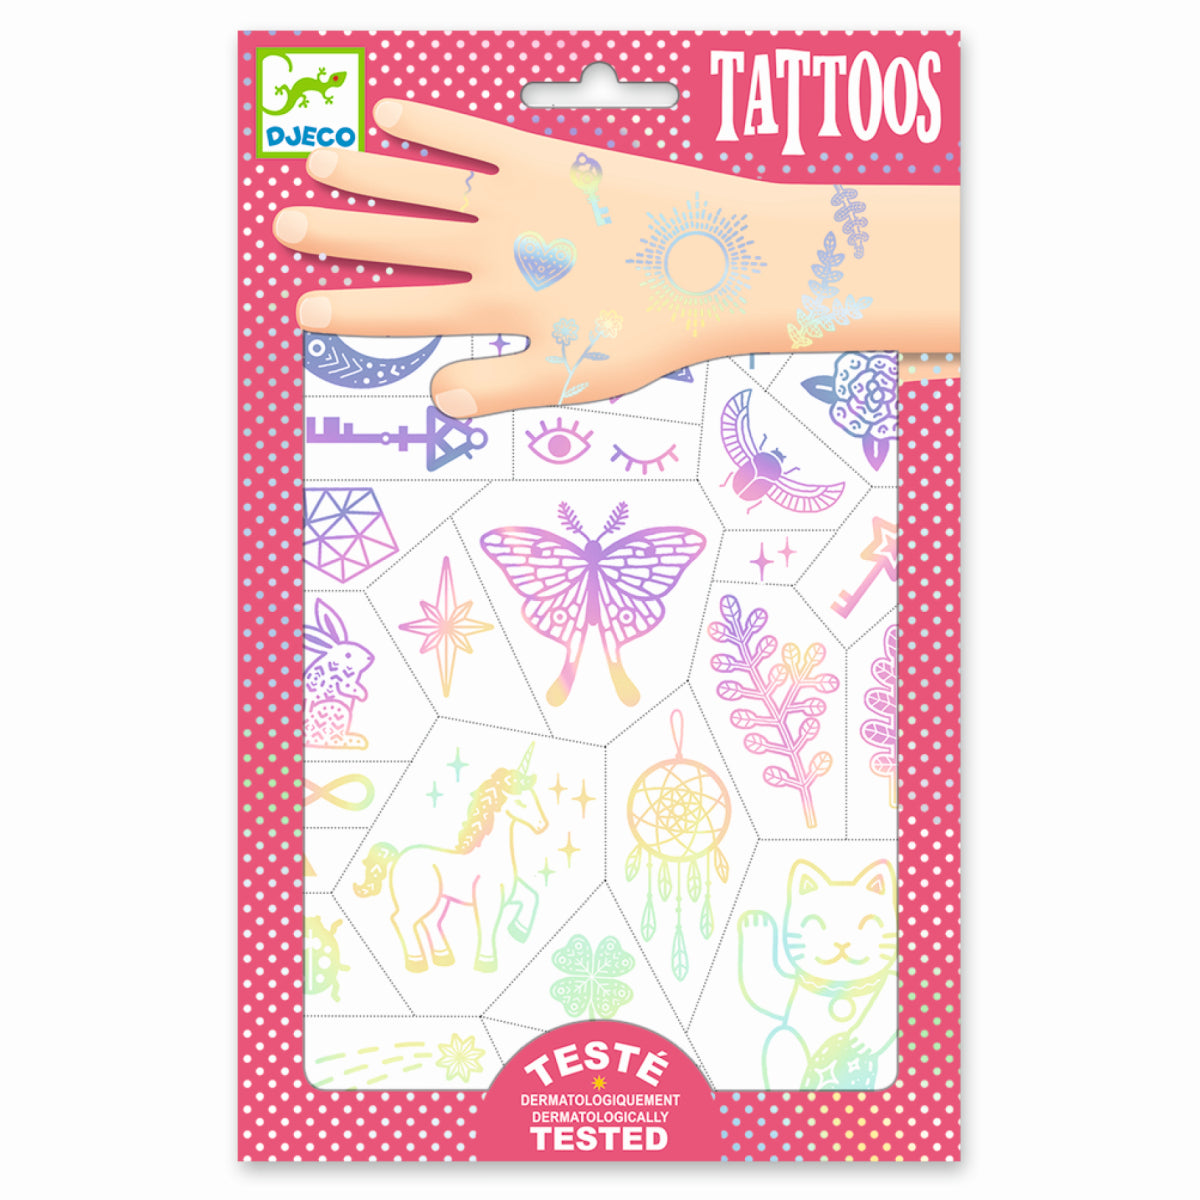 Tattoos Lucky charms